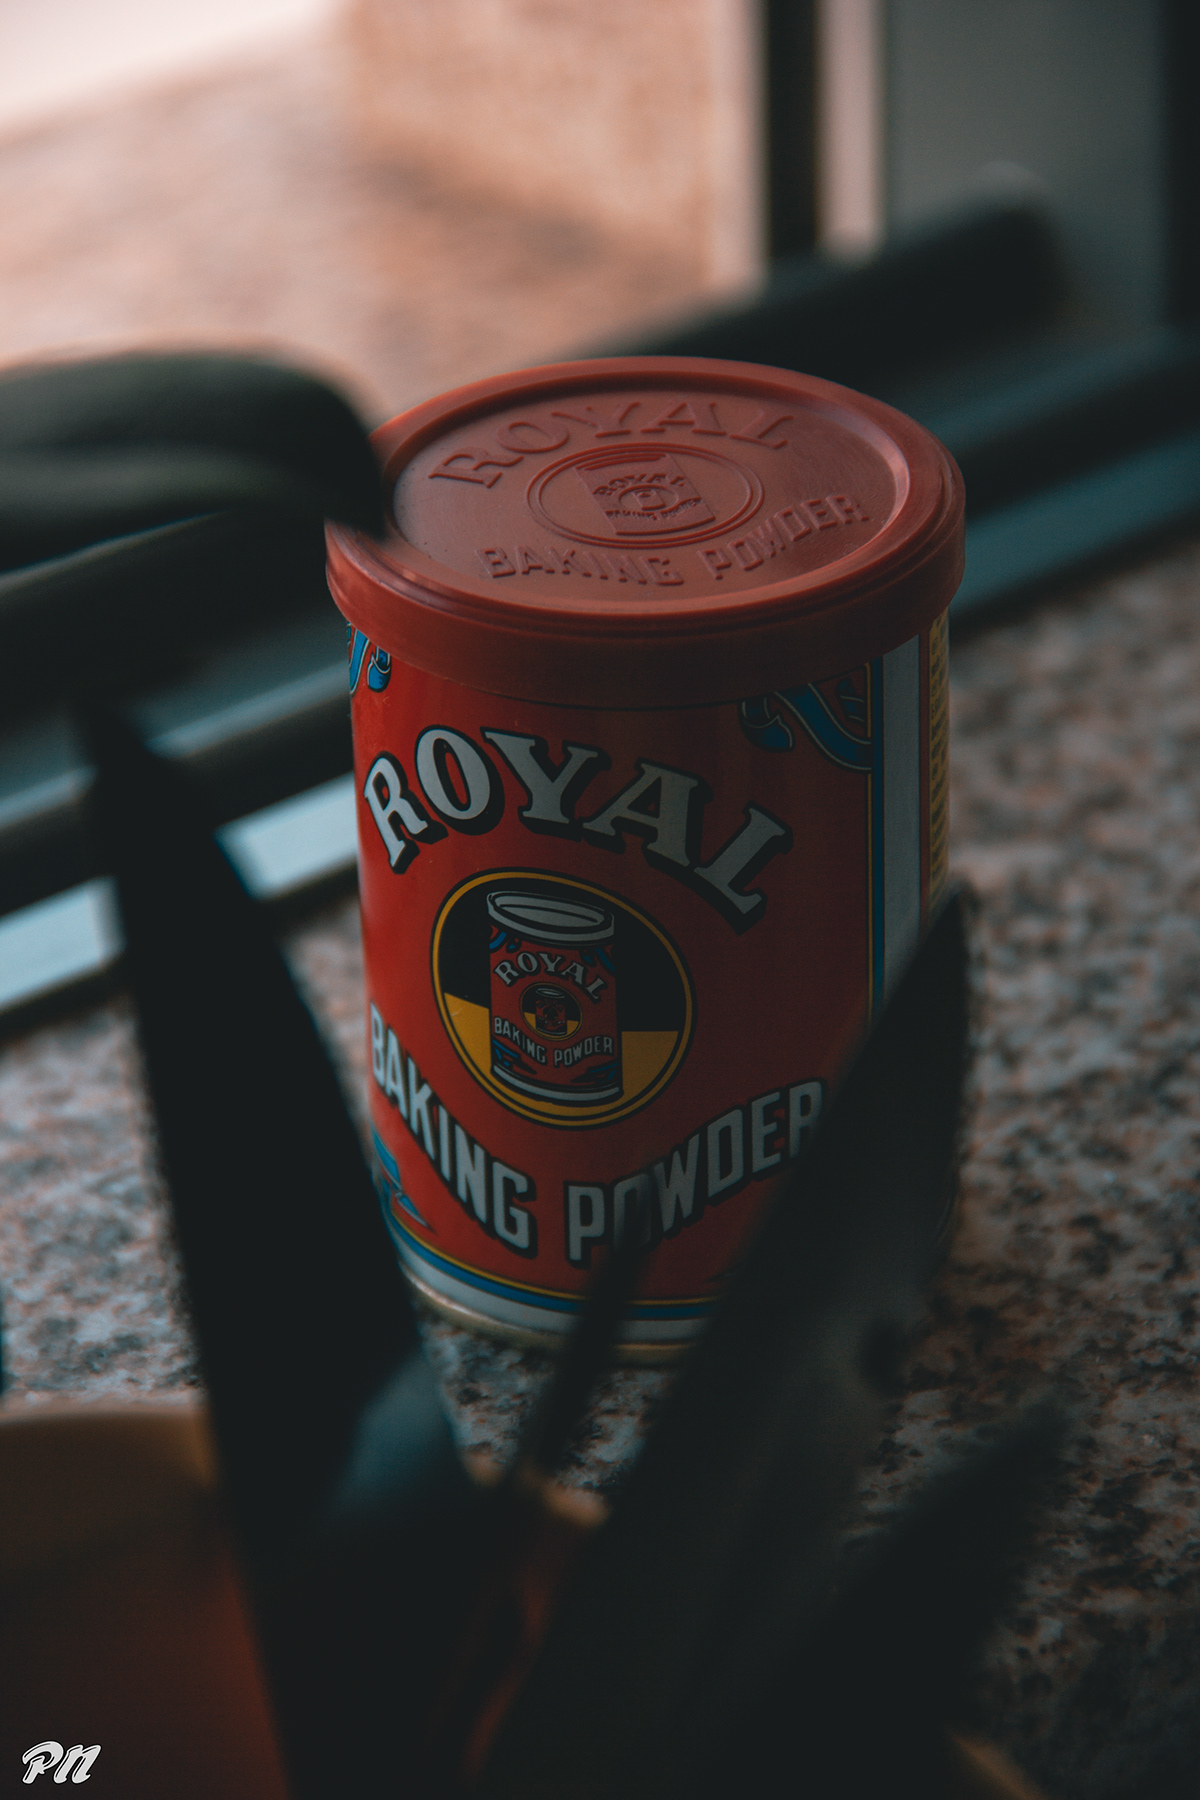 Product Photography Photography  Pedro Neves experimental Royal Baking Powder cooking